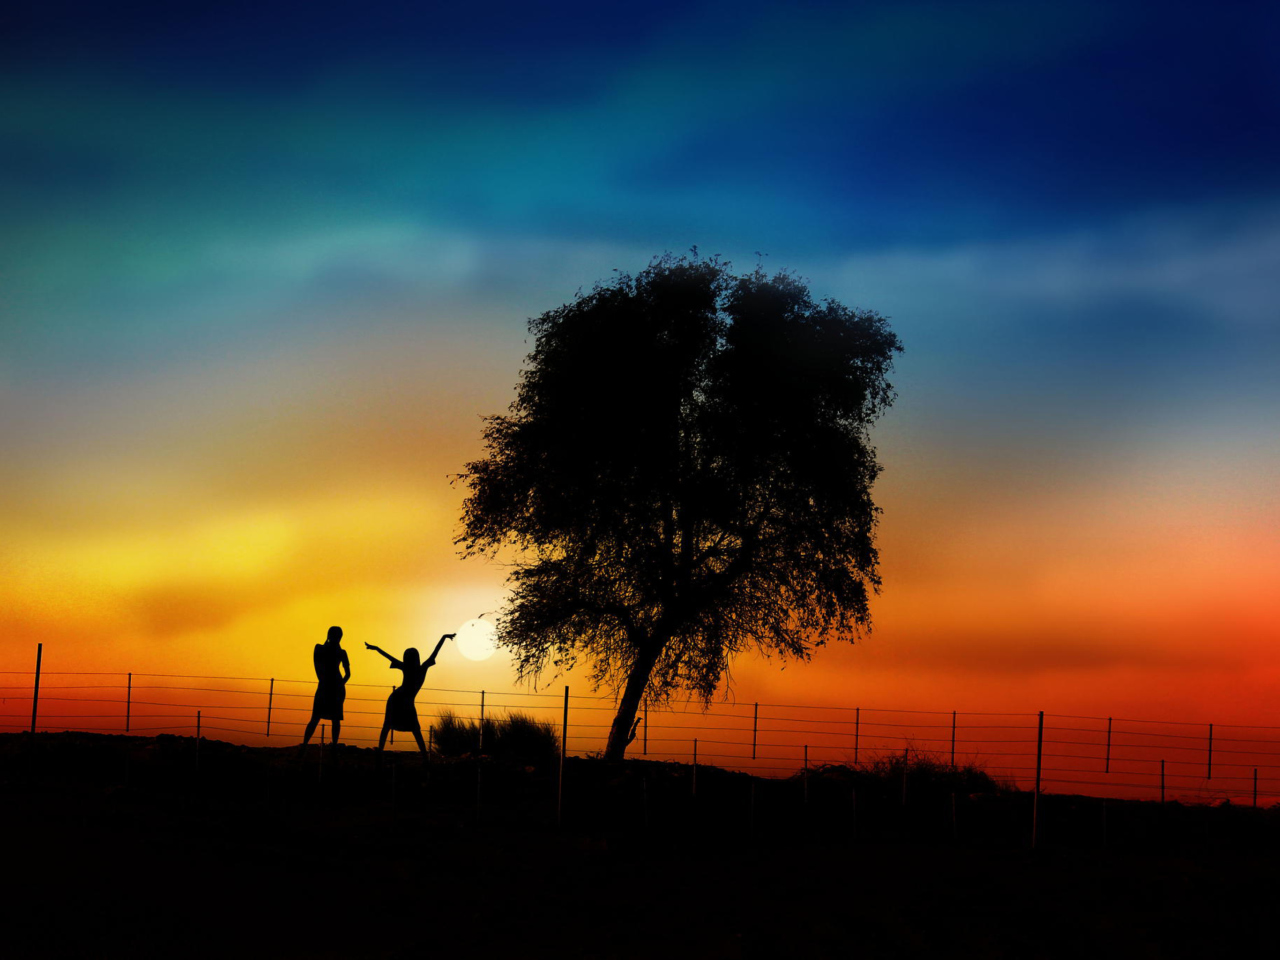 Couple Silhouettes Under Tree At Sunset screenshot #1 1280x960